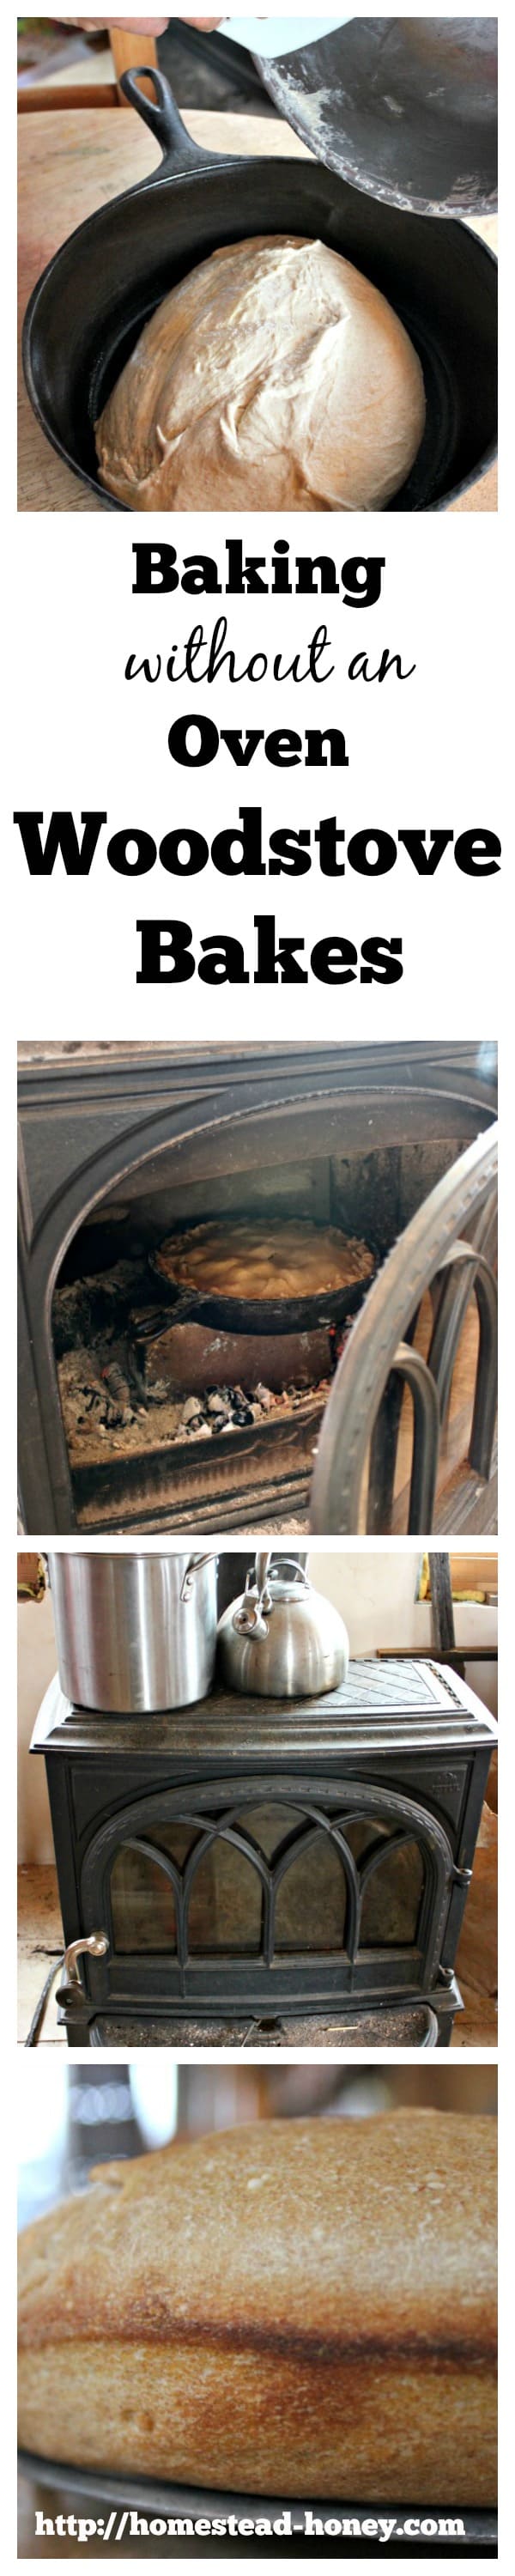 No oven? No problem!  Wood stove bakes are a fun way to bake your favorite food without an oven. | Homestead Honey